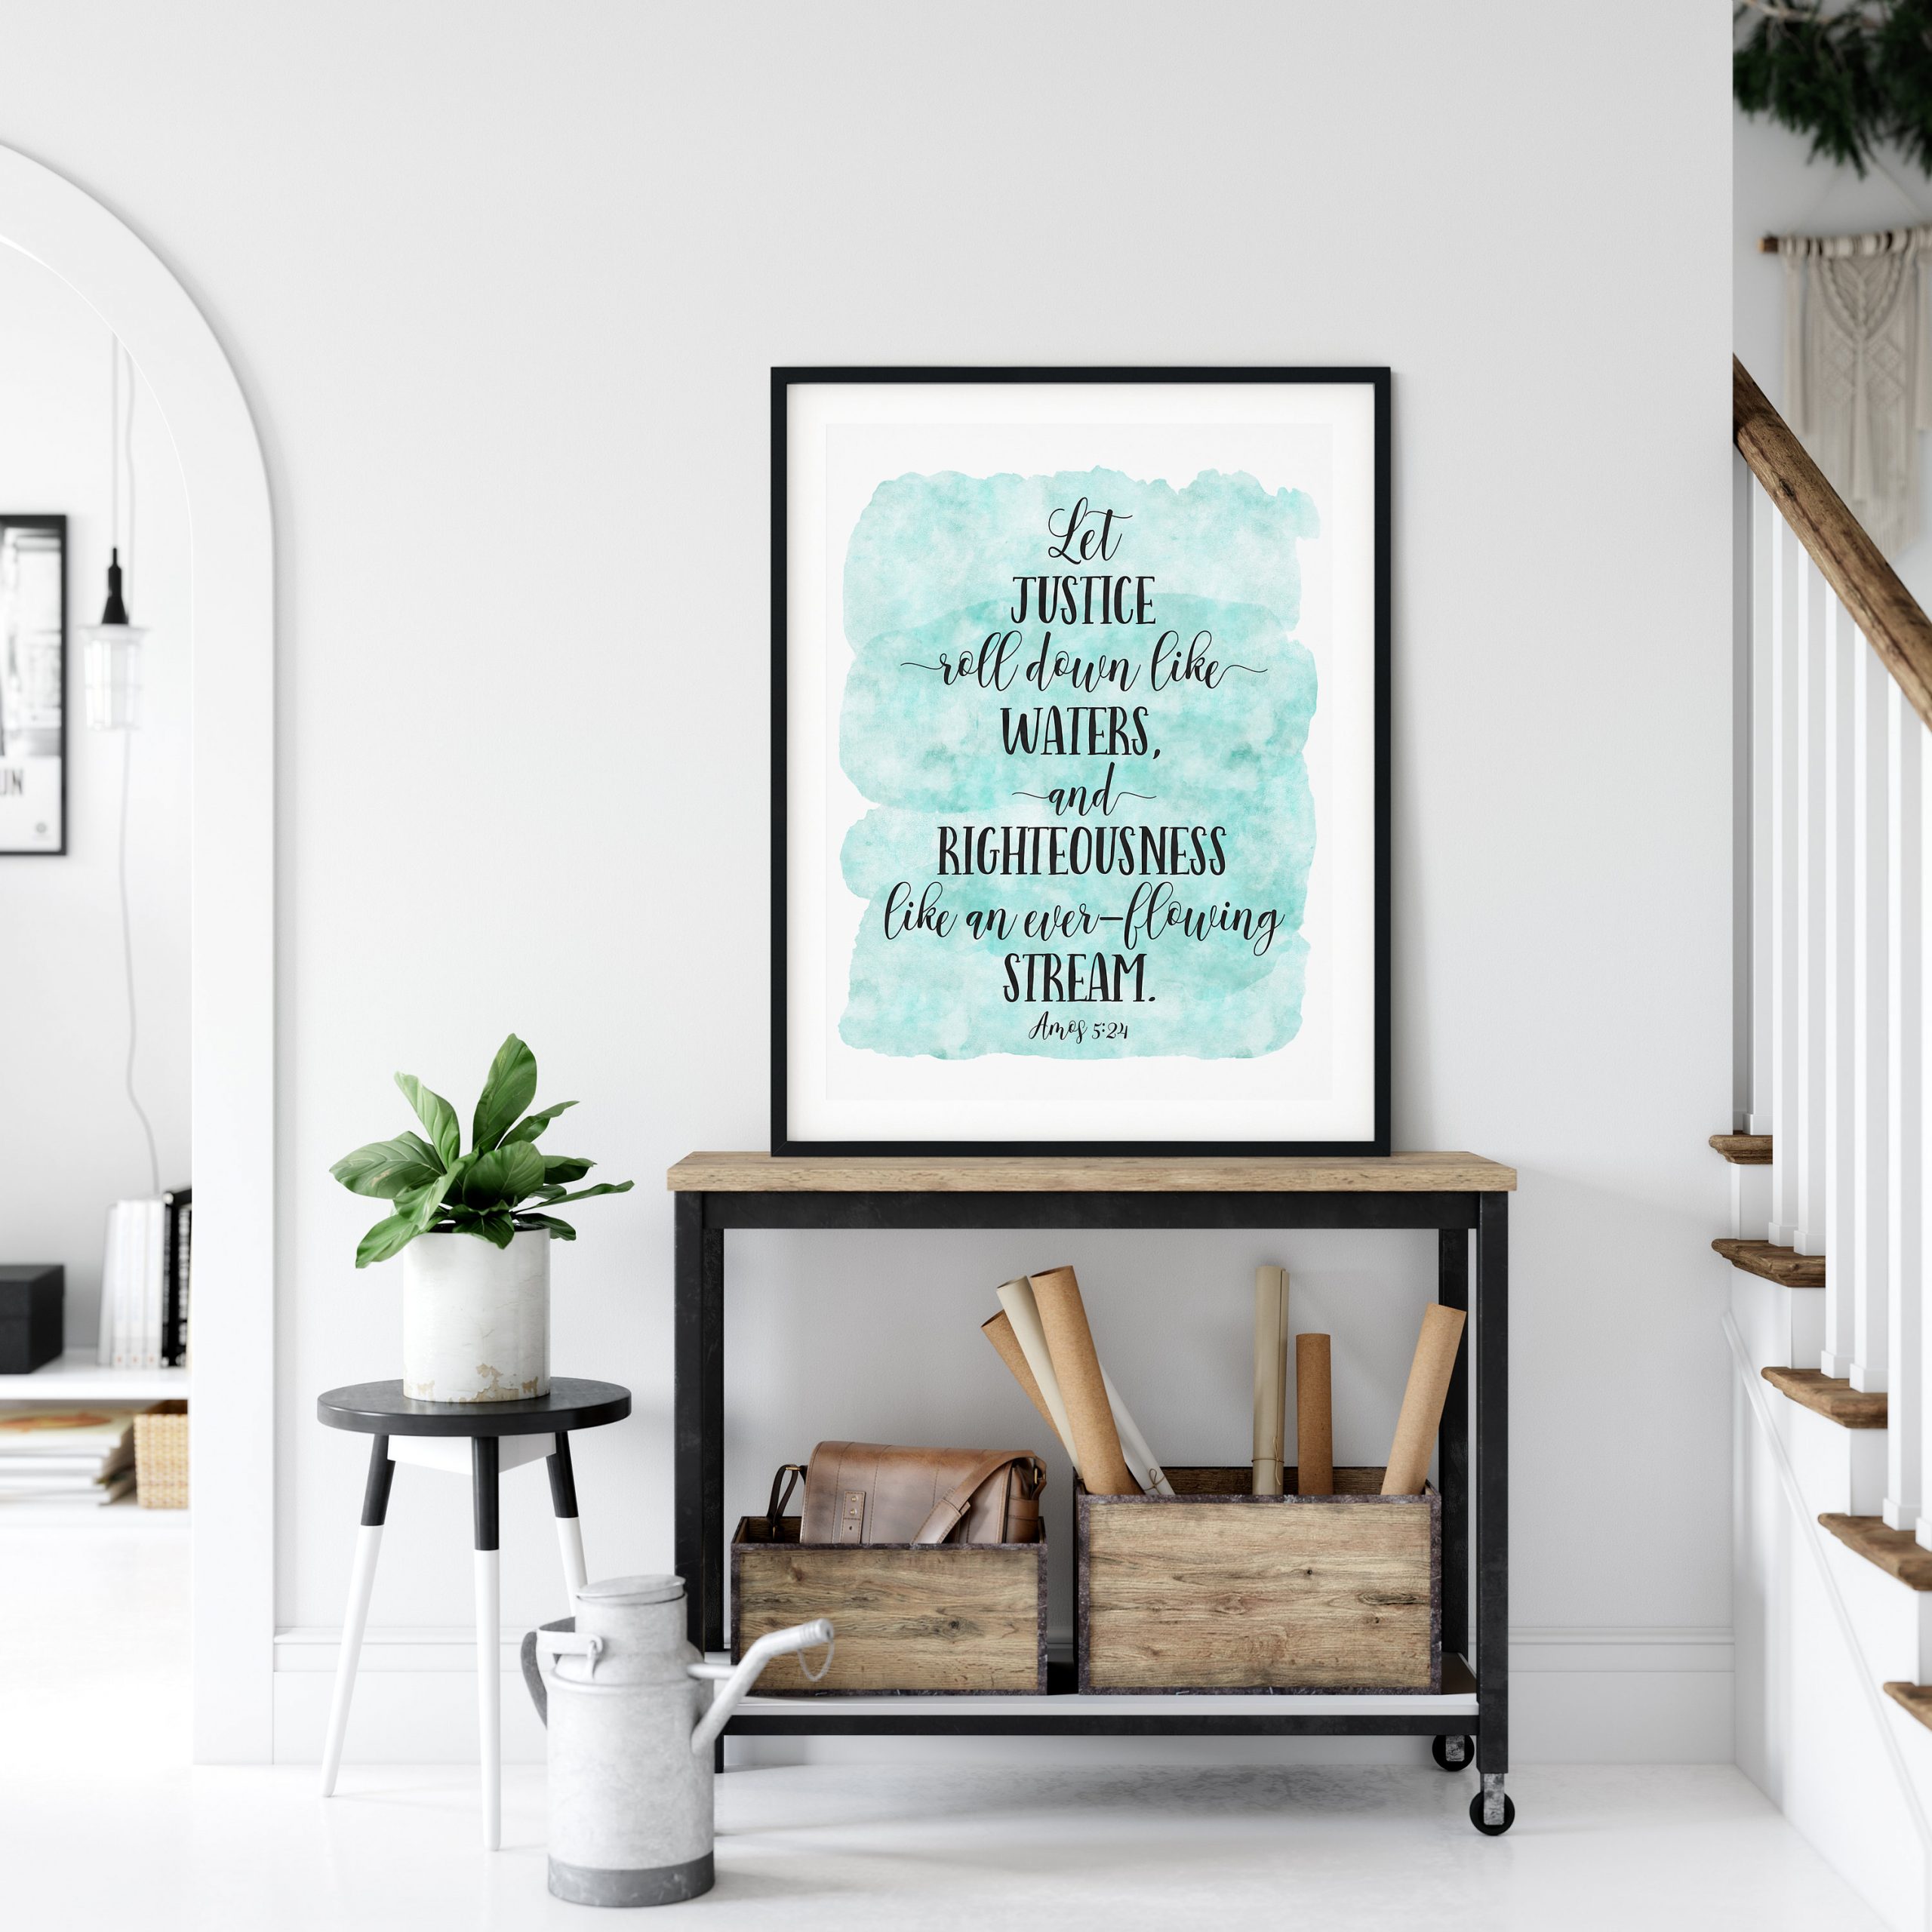 Let Justice Roll Down Like Waters, Amos 5:24, Bible Verse Printable Wall Art, Nursery Decor Quotes